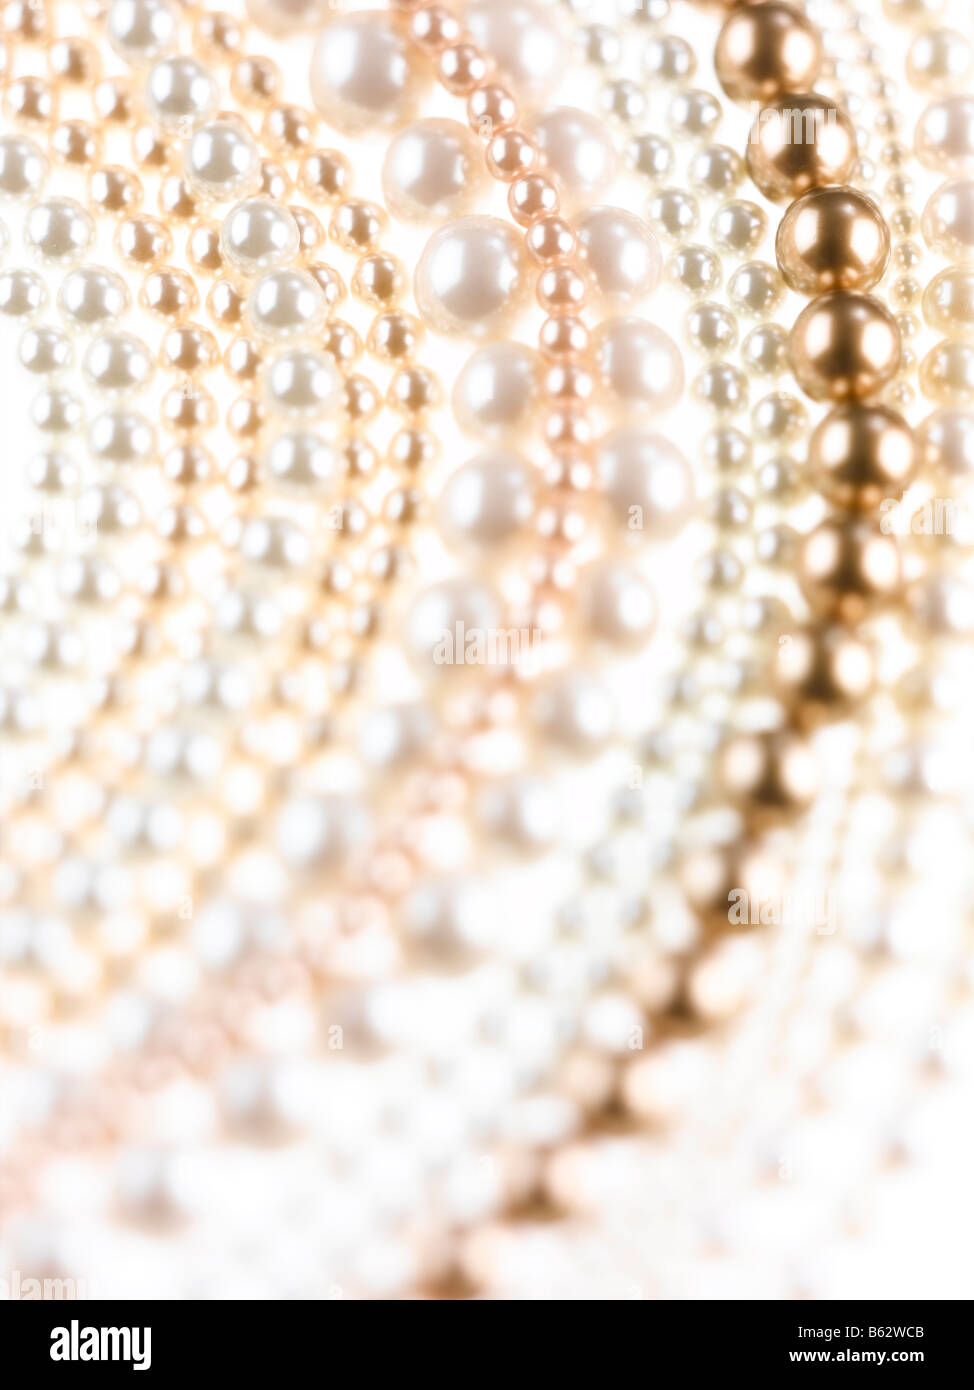 A creative shot of a swirl of Pearls Stock Photo